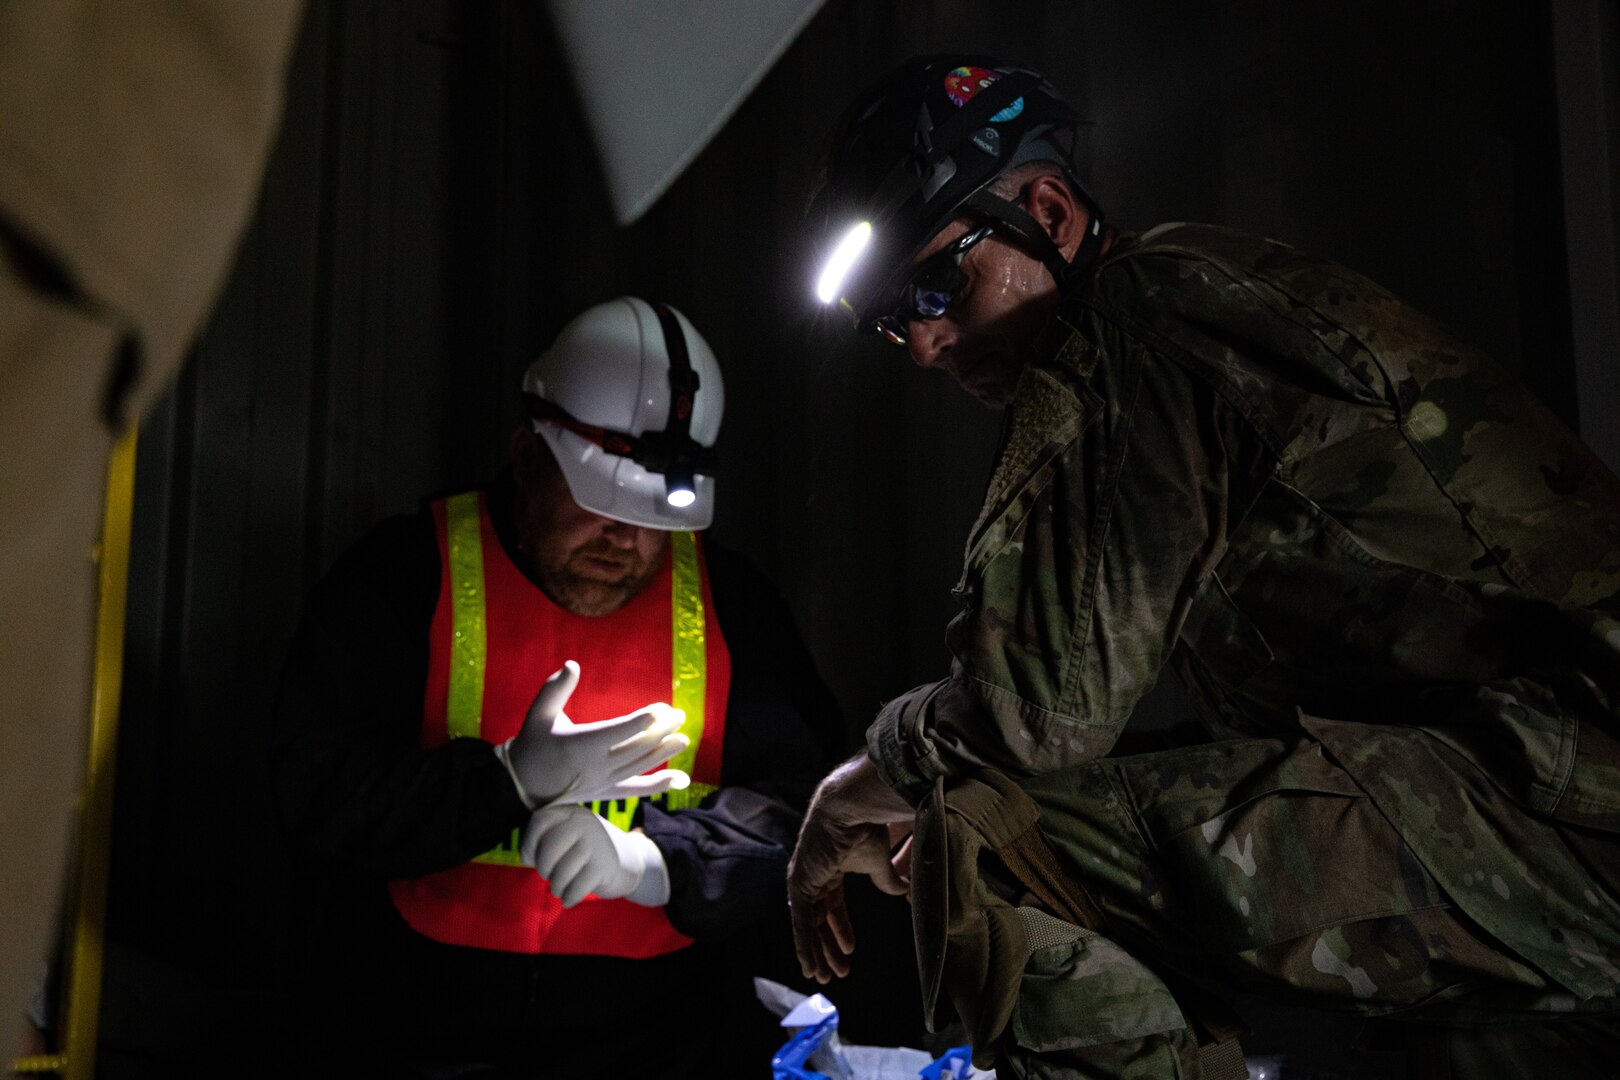 A member of the Oklahoma National Guard’s 63rd Civil Support Team, Sgt. 1st Class Ronald Poland, assesses a mock patient during a collapsed building exercise at the Edmond Fire Training Center, Edmond, Oklahoma, October 4, 2023. This simulation is part of a biennial weeklong operational readiness exercise, designed to ensure local first responder organizations maintain preparedness and familiarity with one another. (Oklahoma National Guard photo by Staff Sgt. Reece Heck)